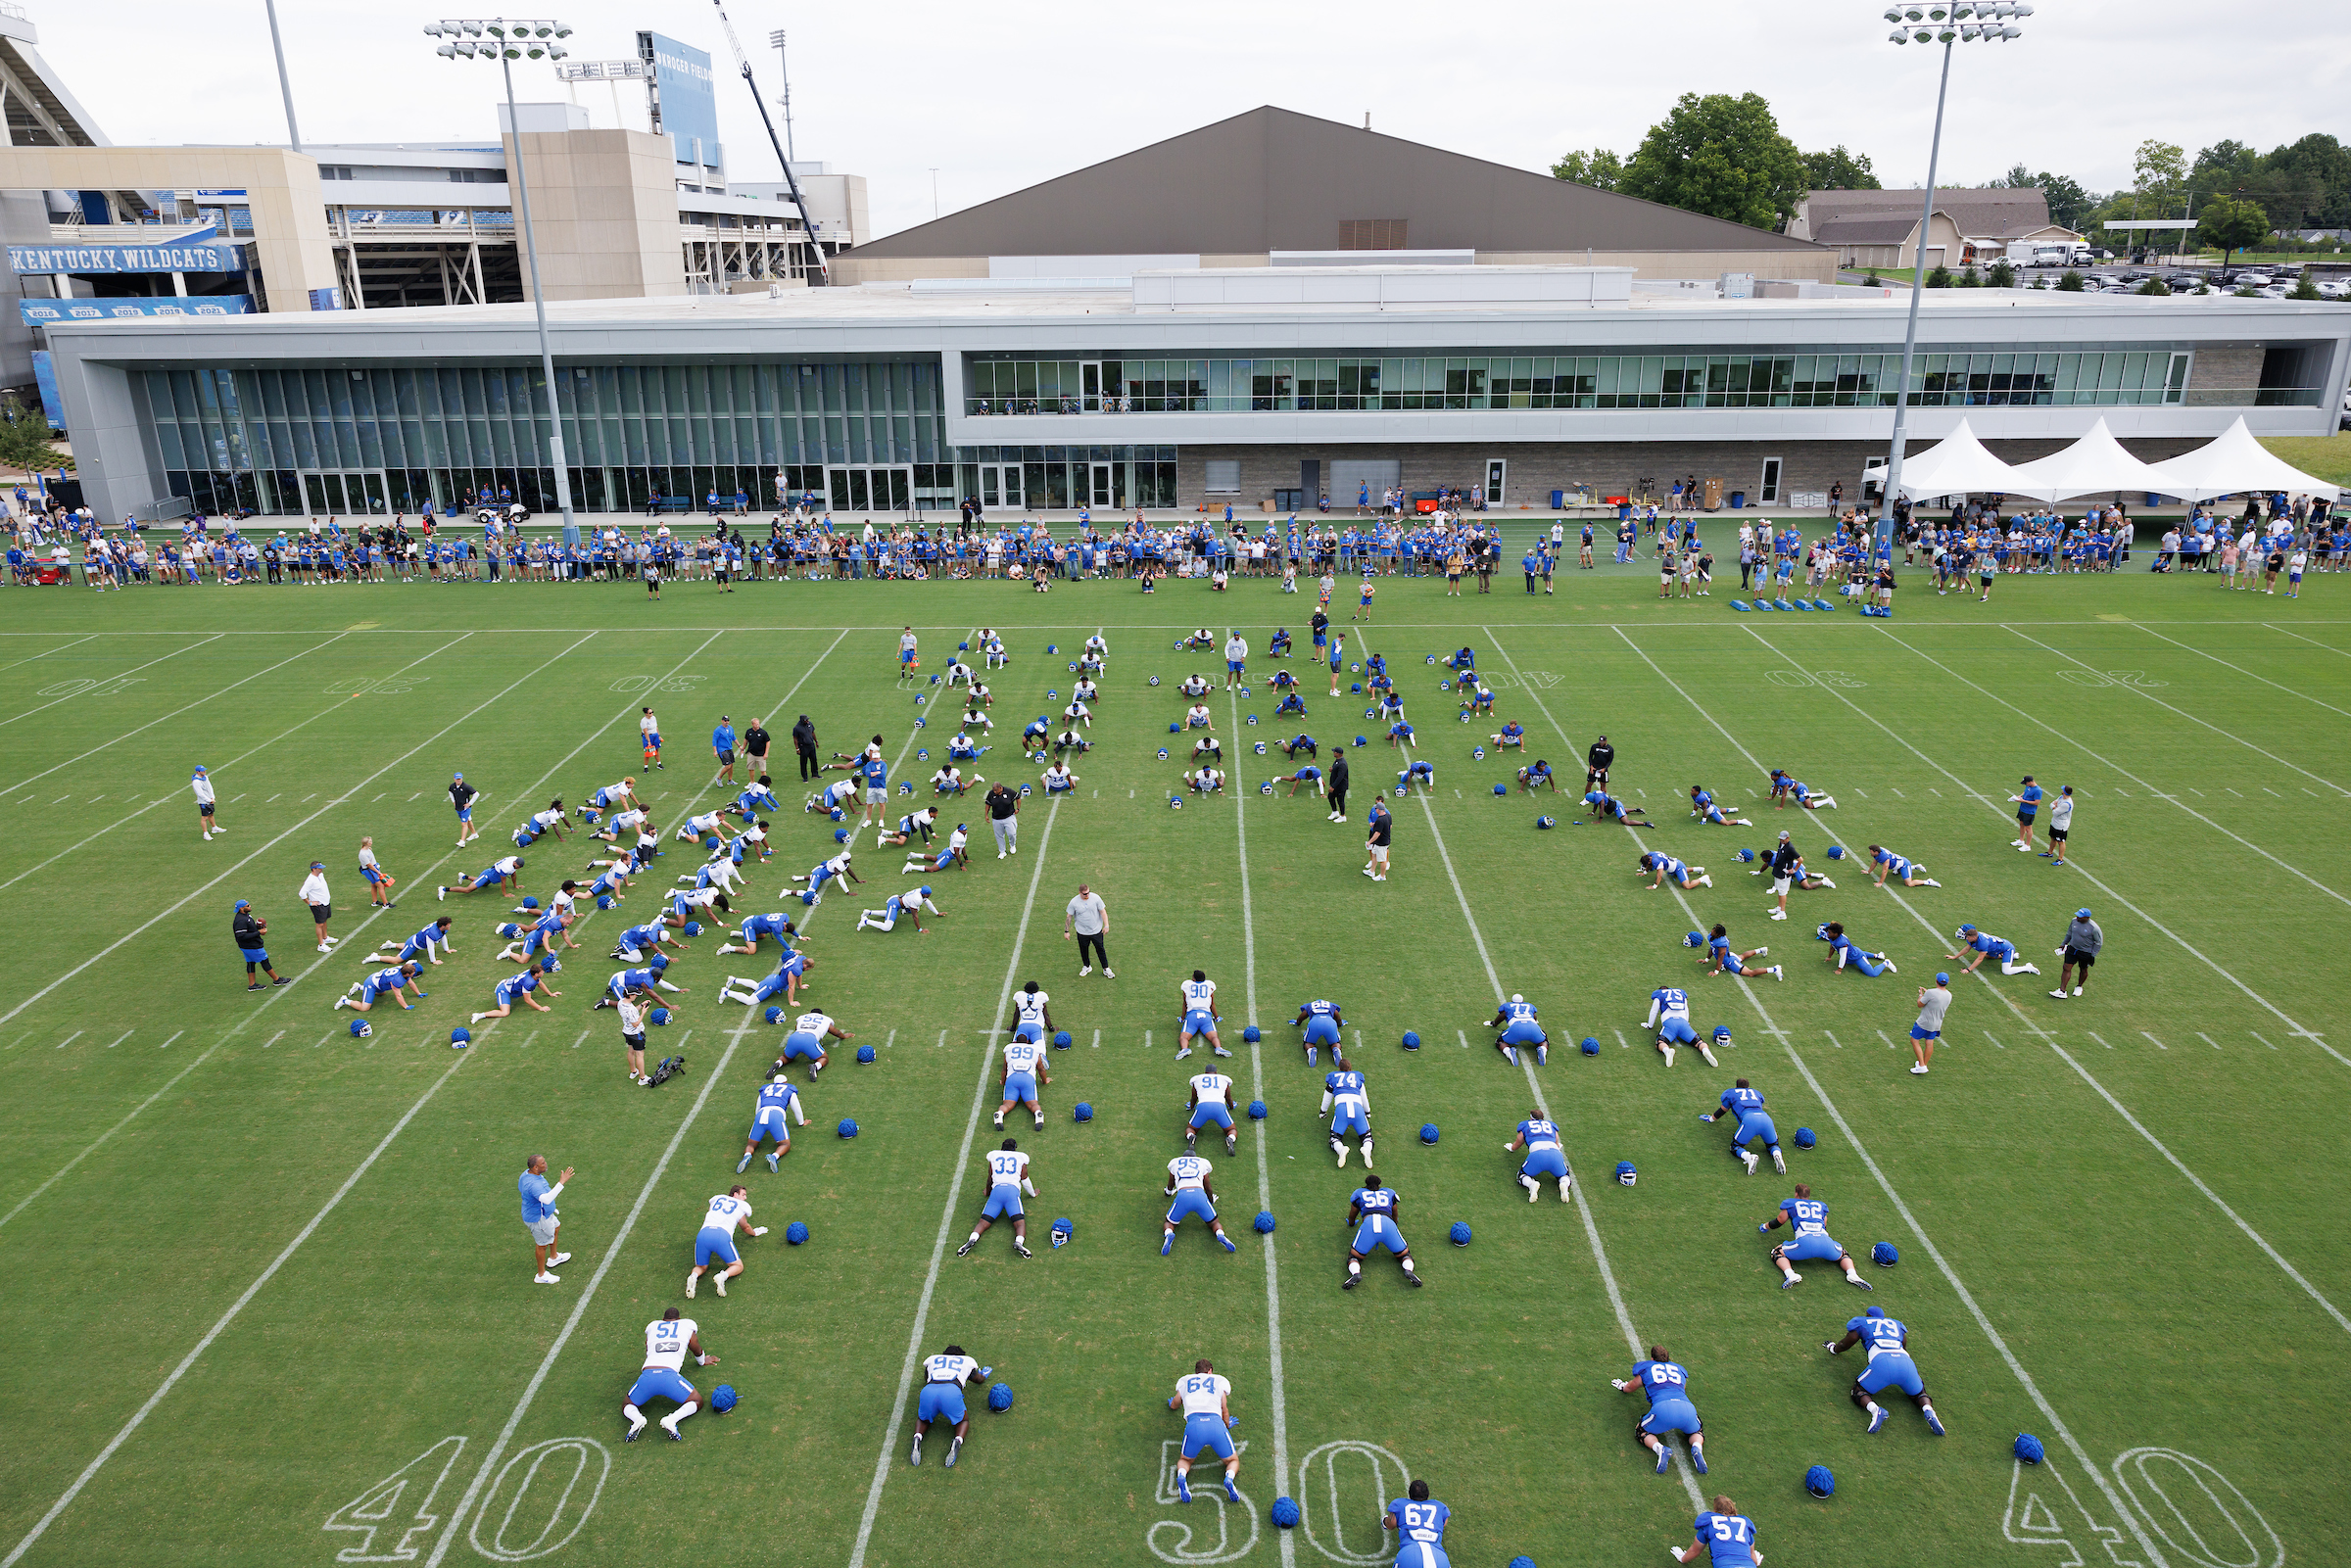 UK FB: Fan Day, Presented by UK HealthCare, Returns Aug. 5